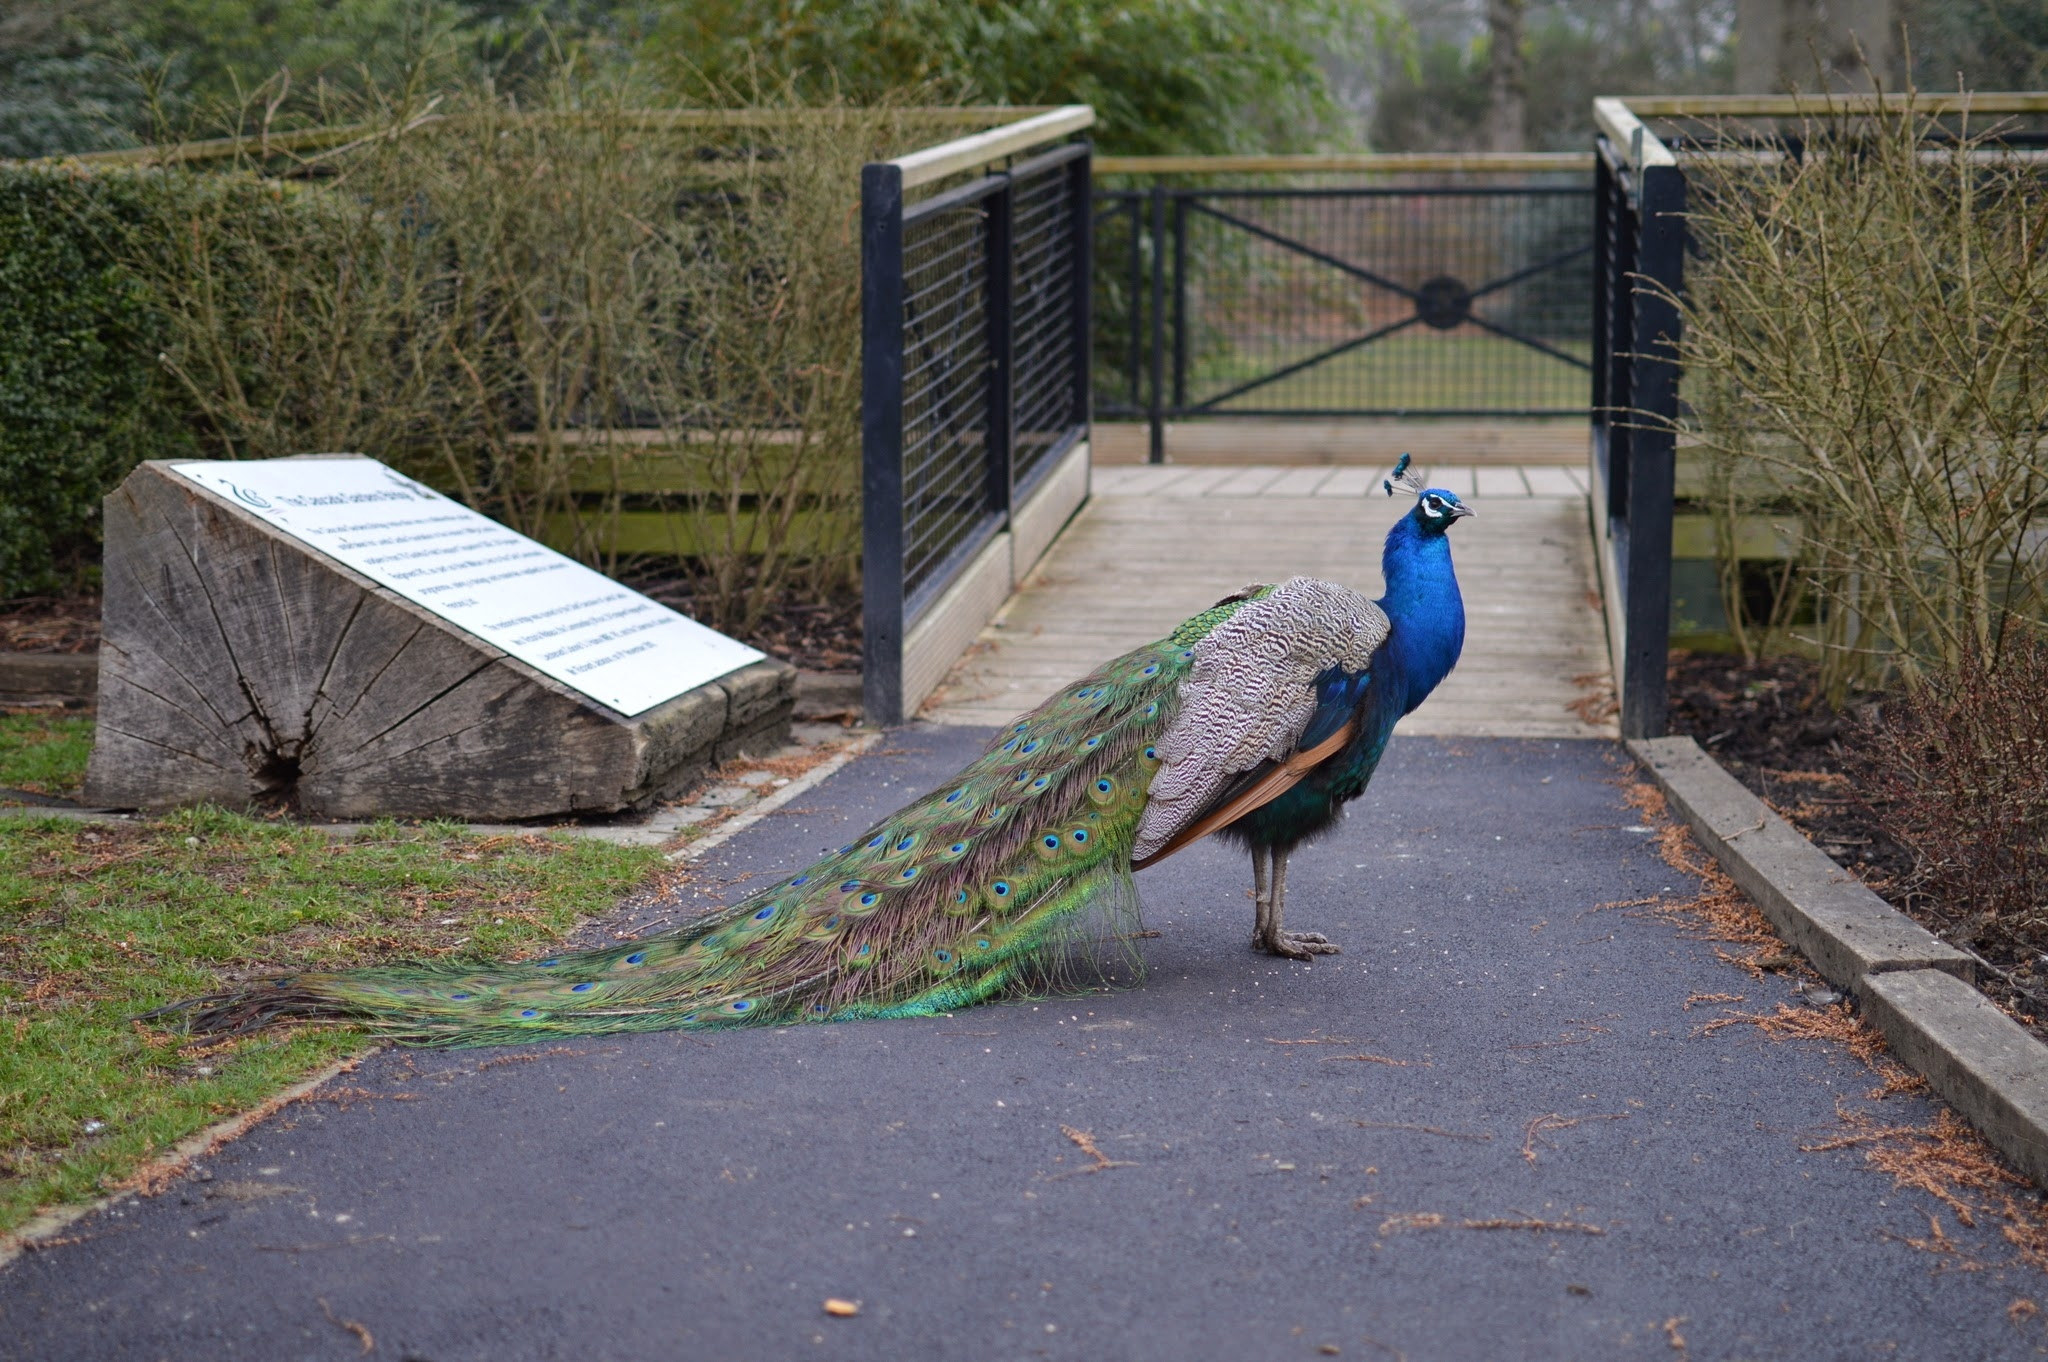 A peacock standing on a paved road